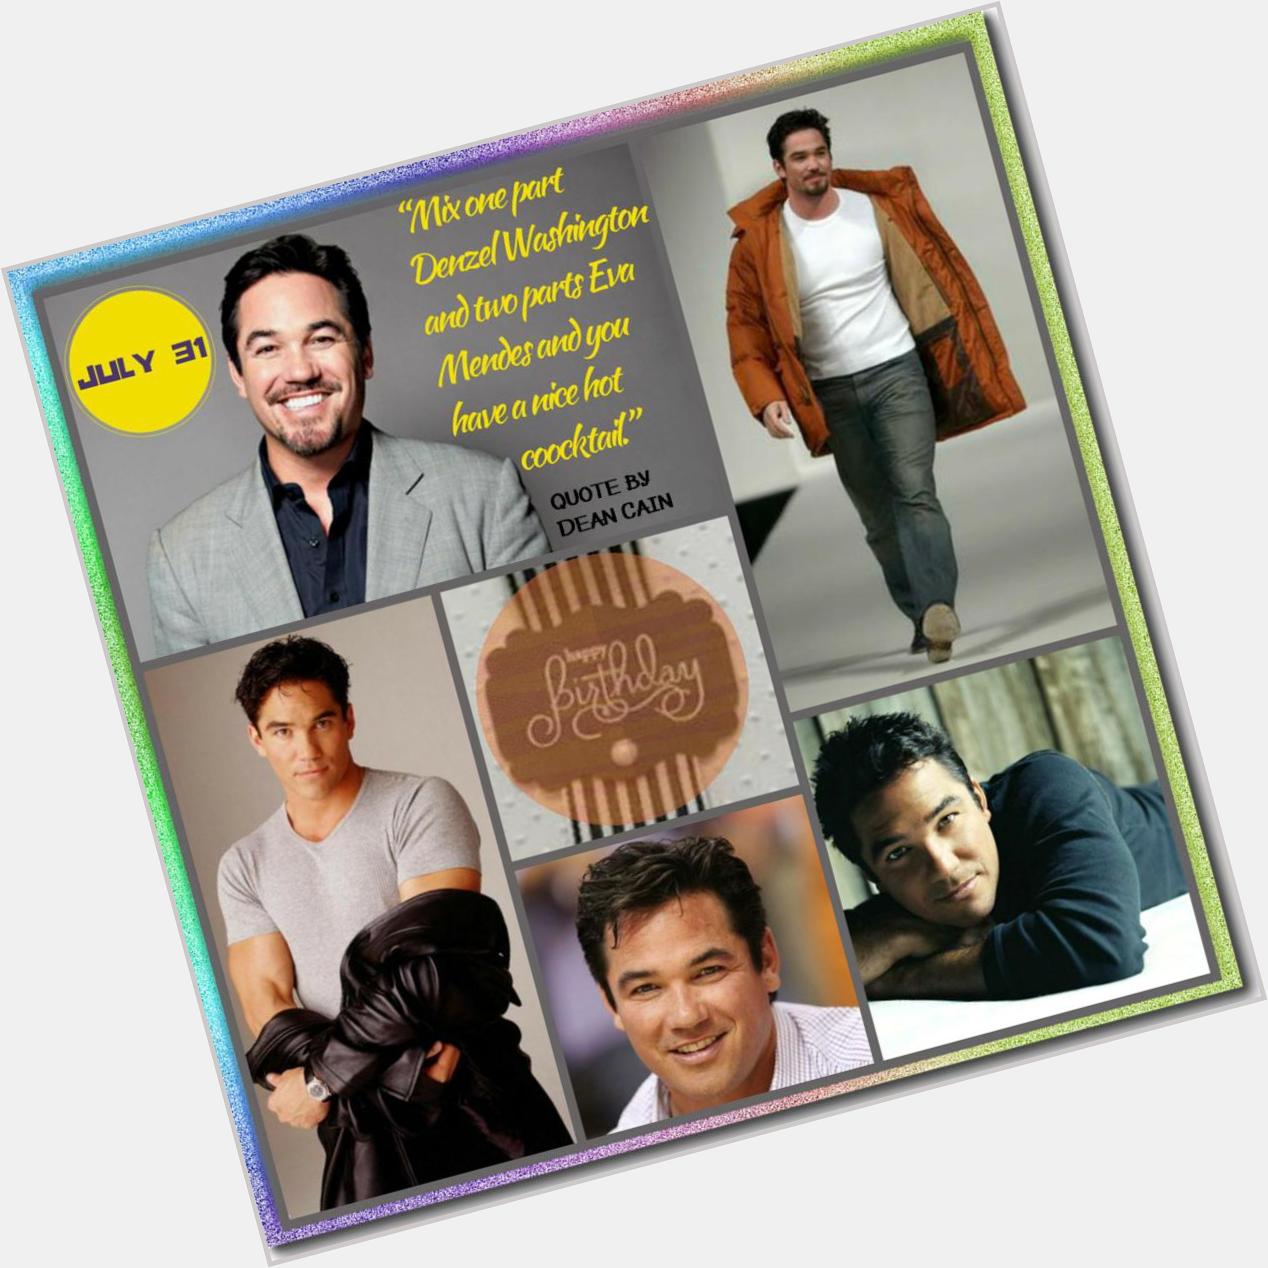 Happy Birthday Dean Cain - July 31 Event  